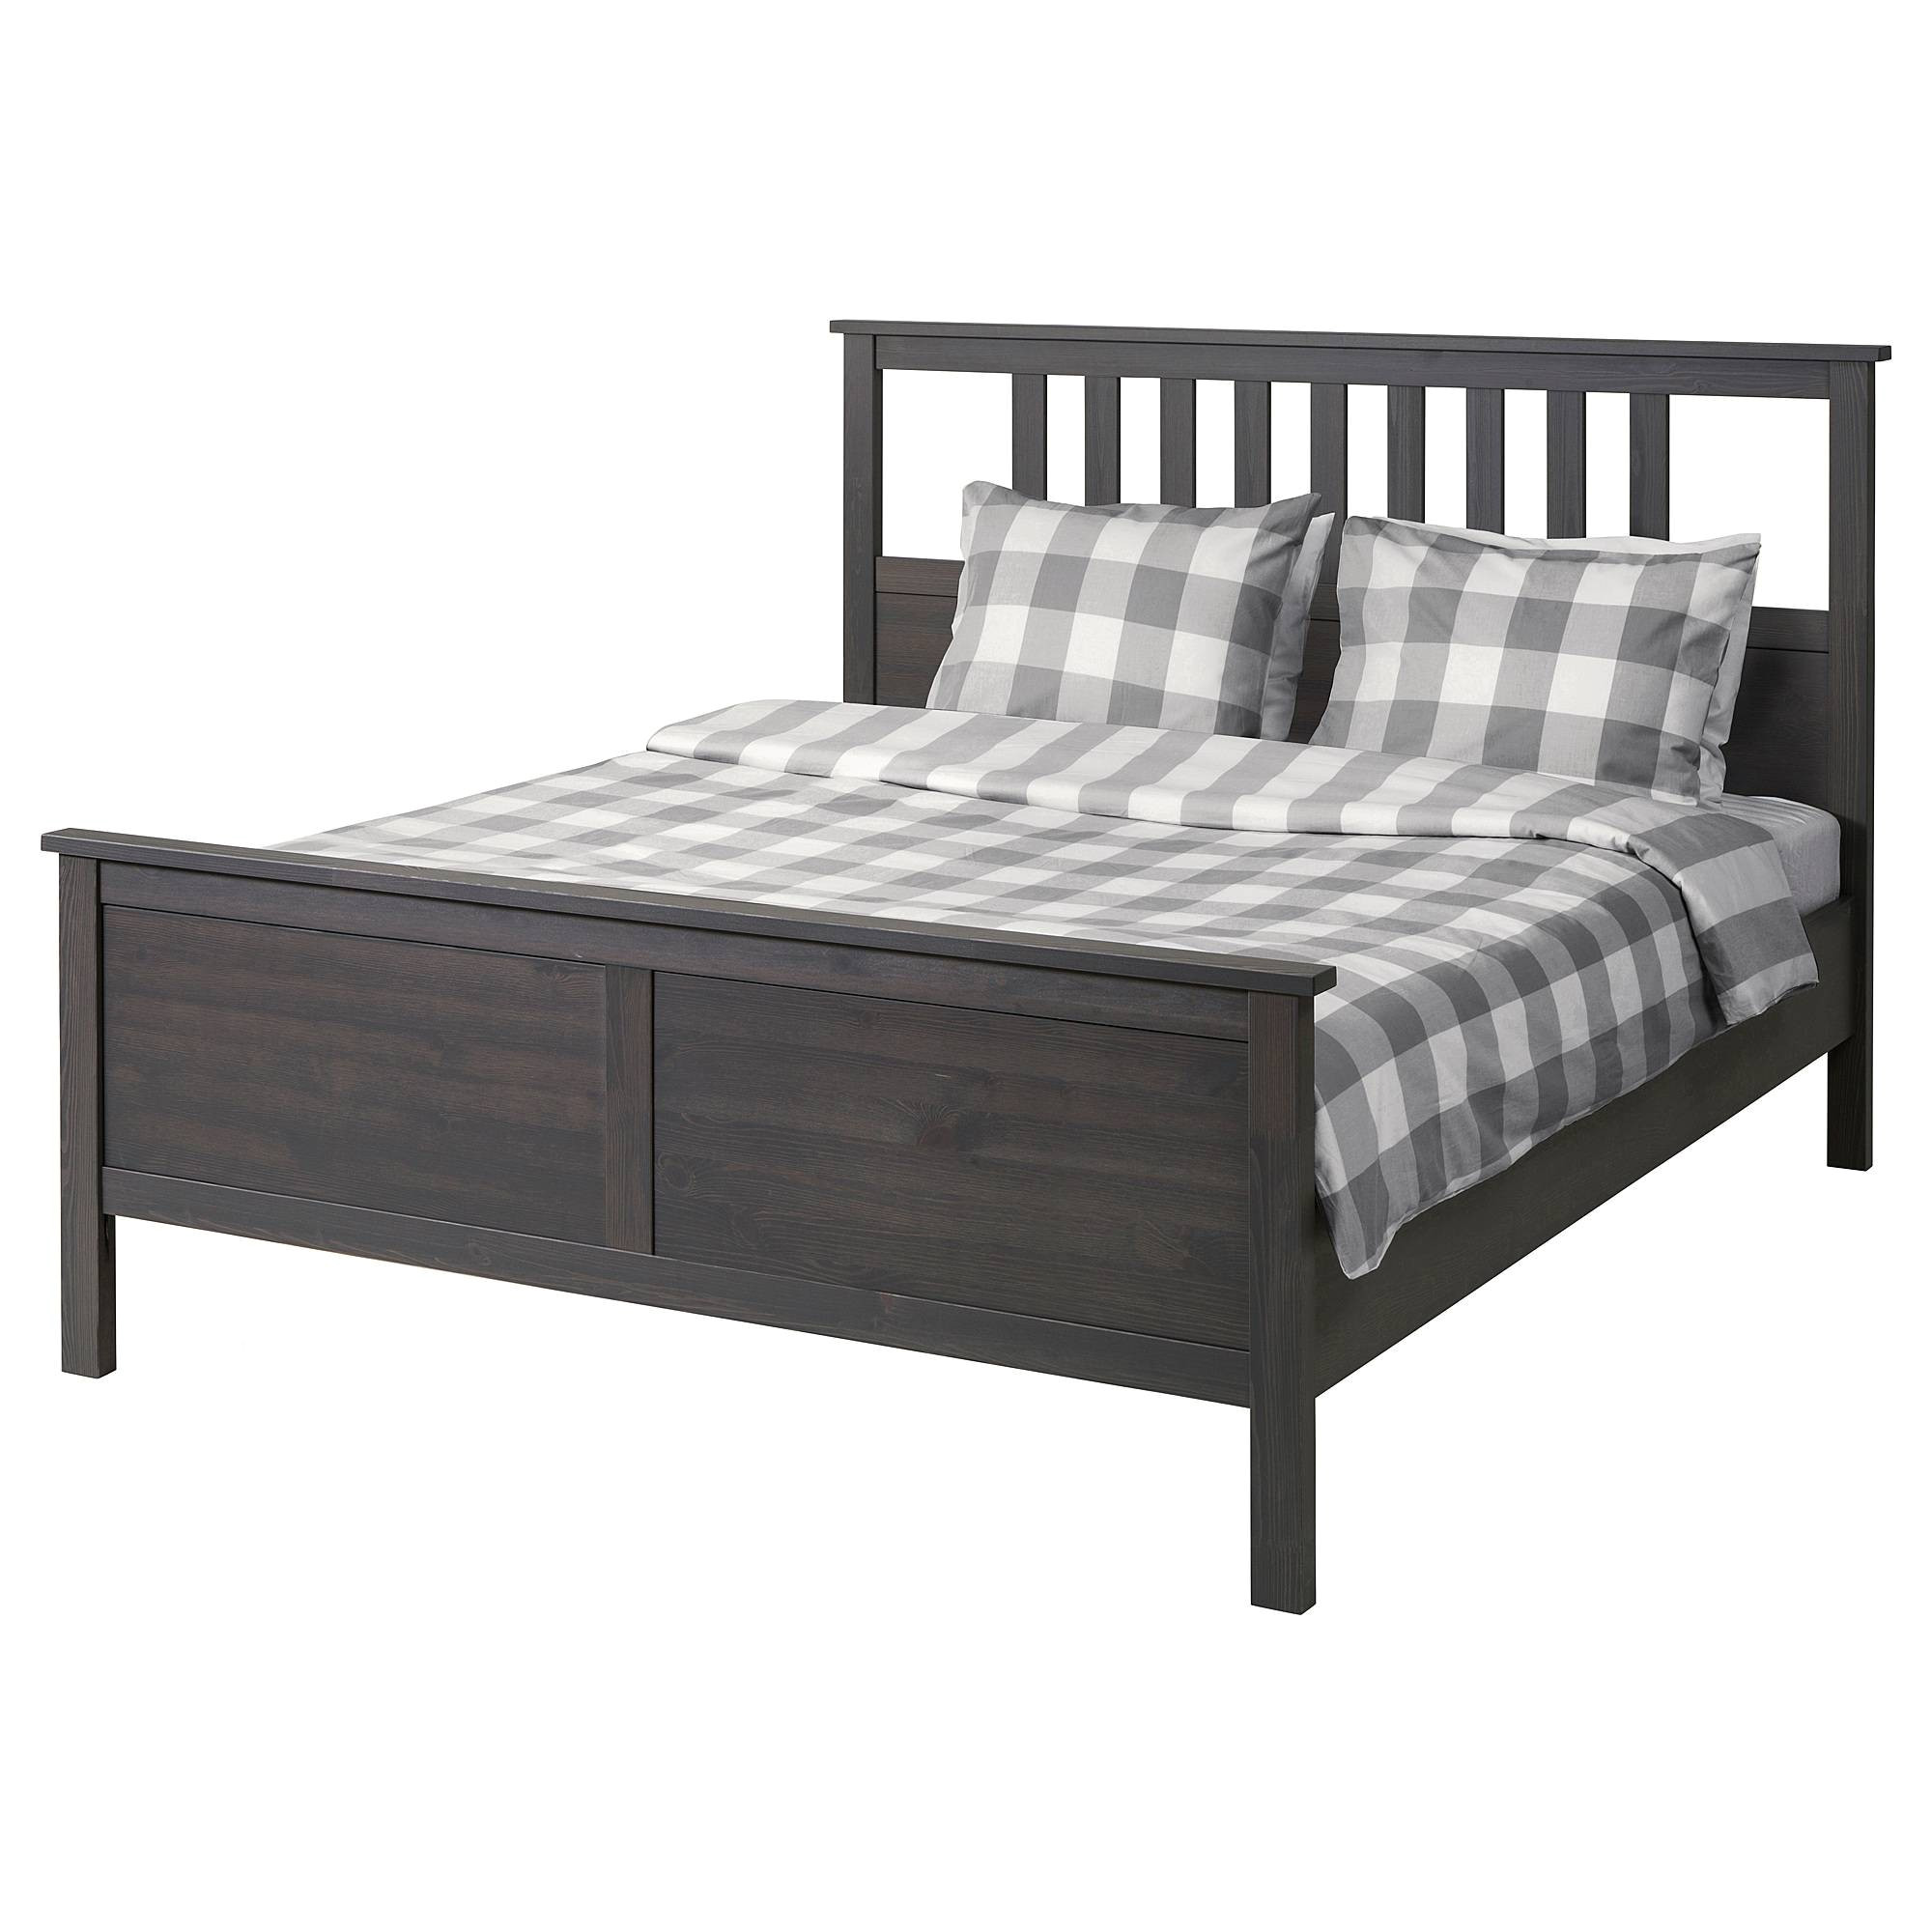 eastern king bed frame awesome headboards king size headboard dimensions beautiful dimensions of eastern king bed